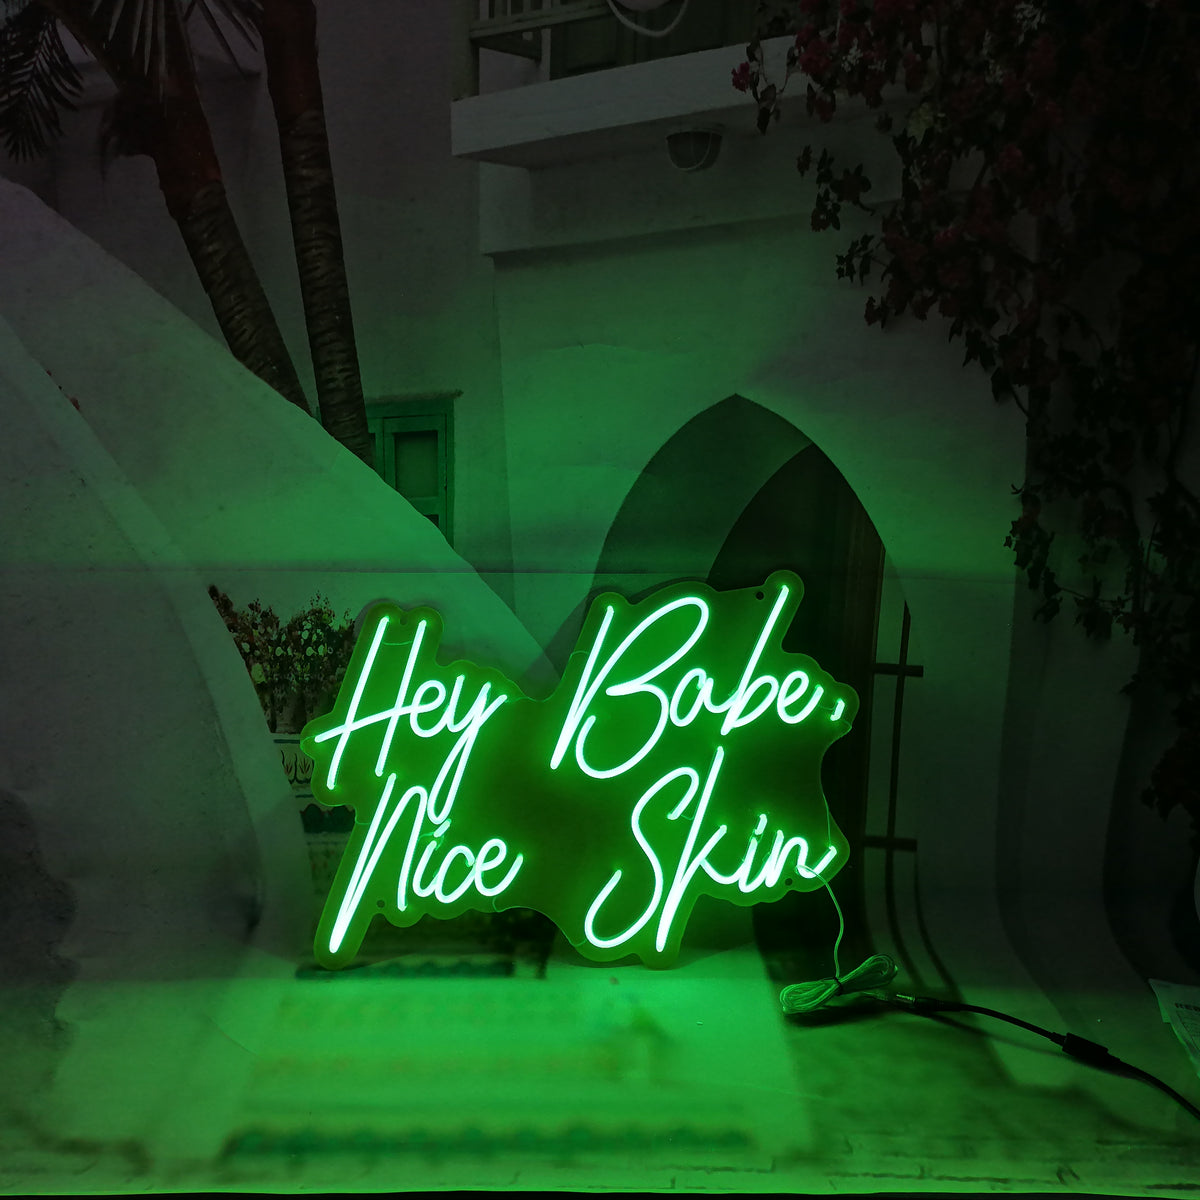 &quot;Hey Babe, Nice Skin&quot; Neon Led Sign